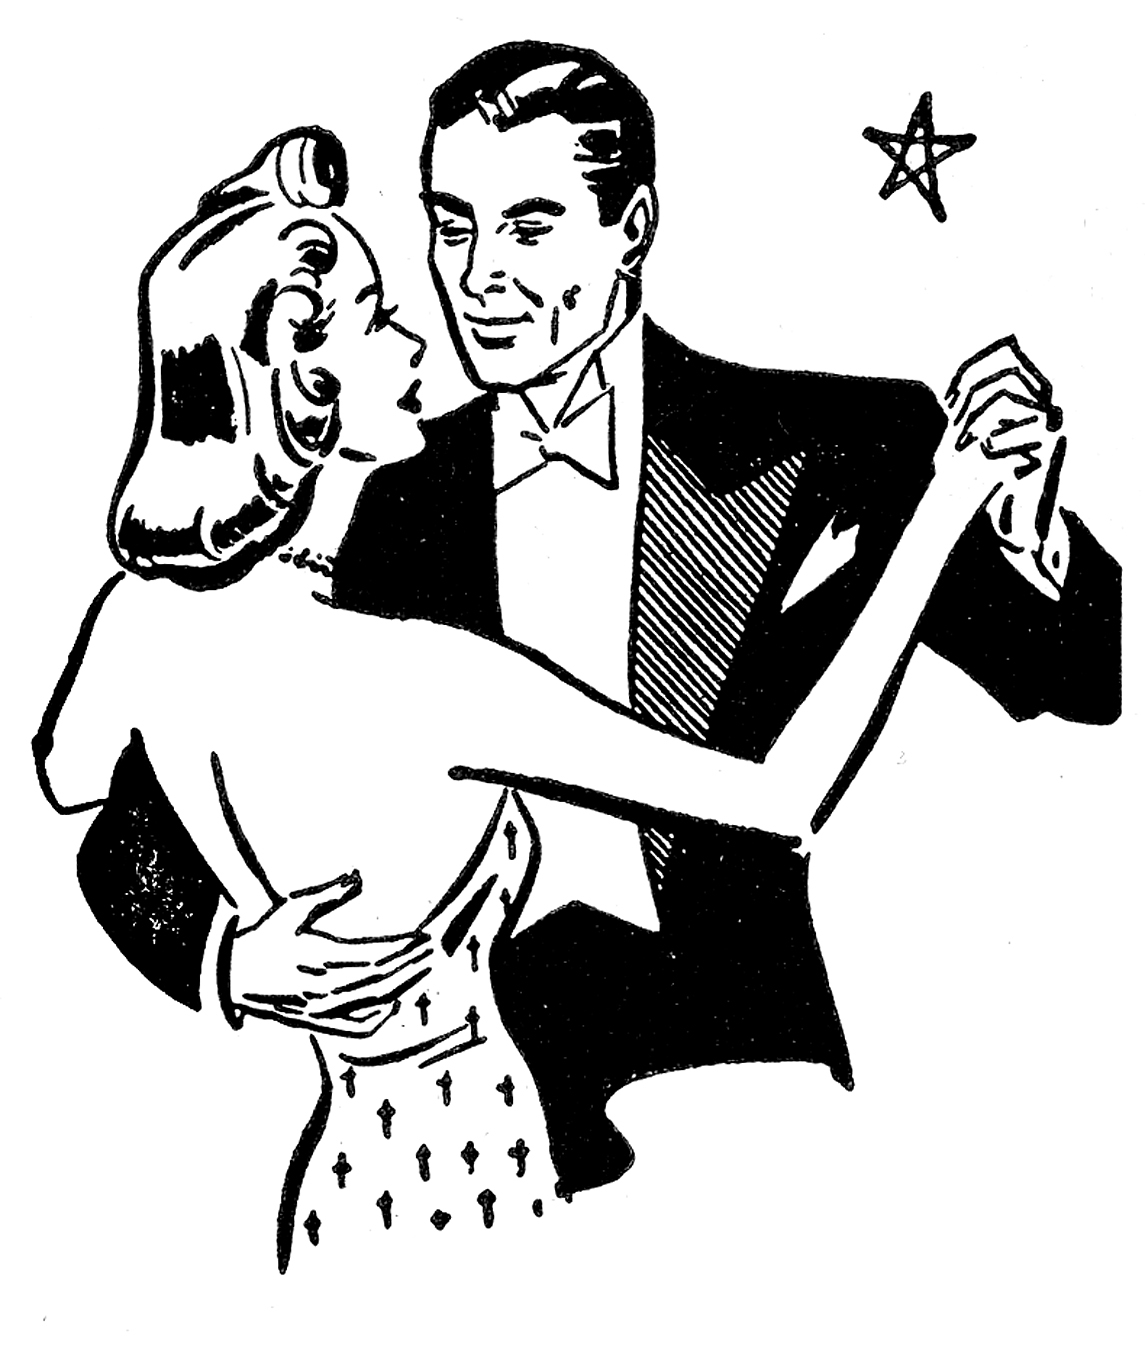 dancing-couple-vintage-GraphicsFairy - The Graphics Fairy